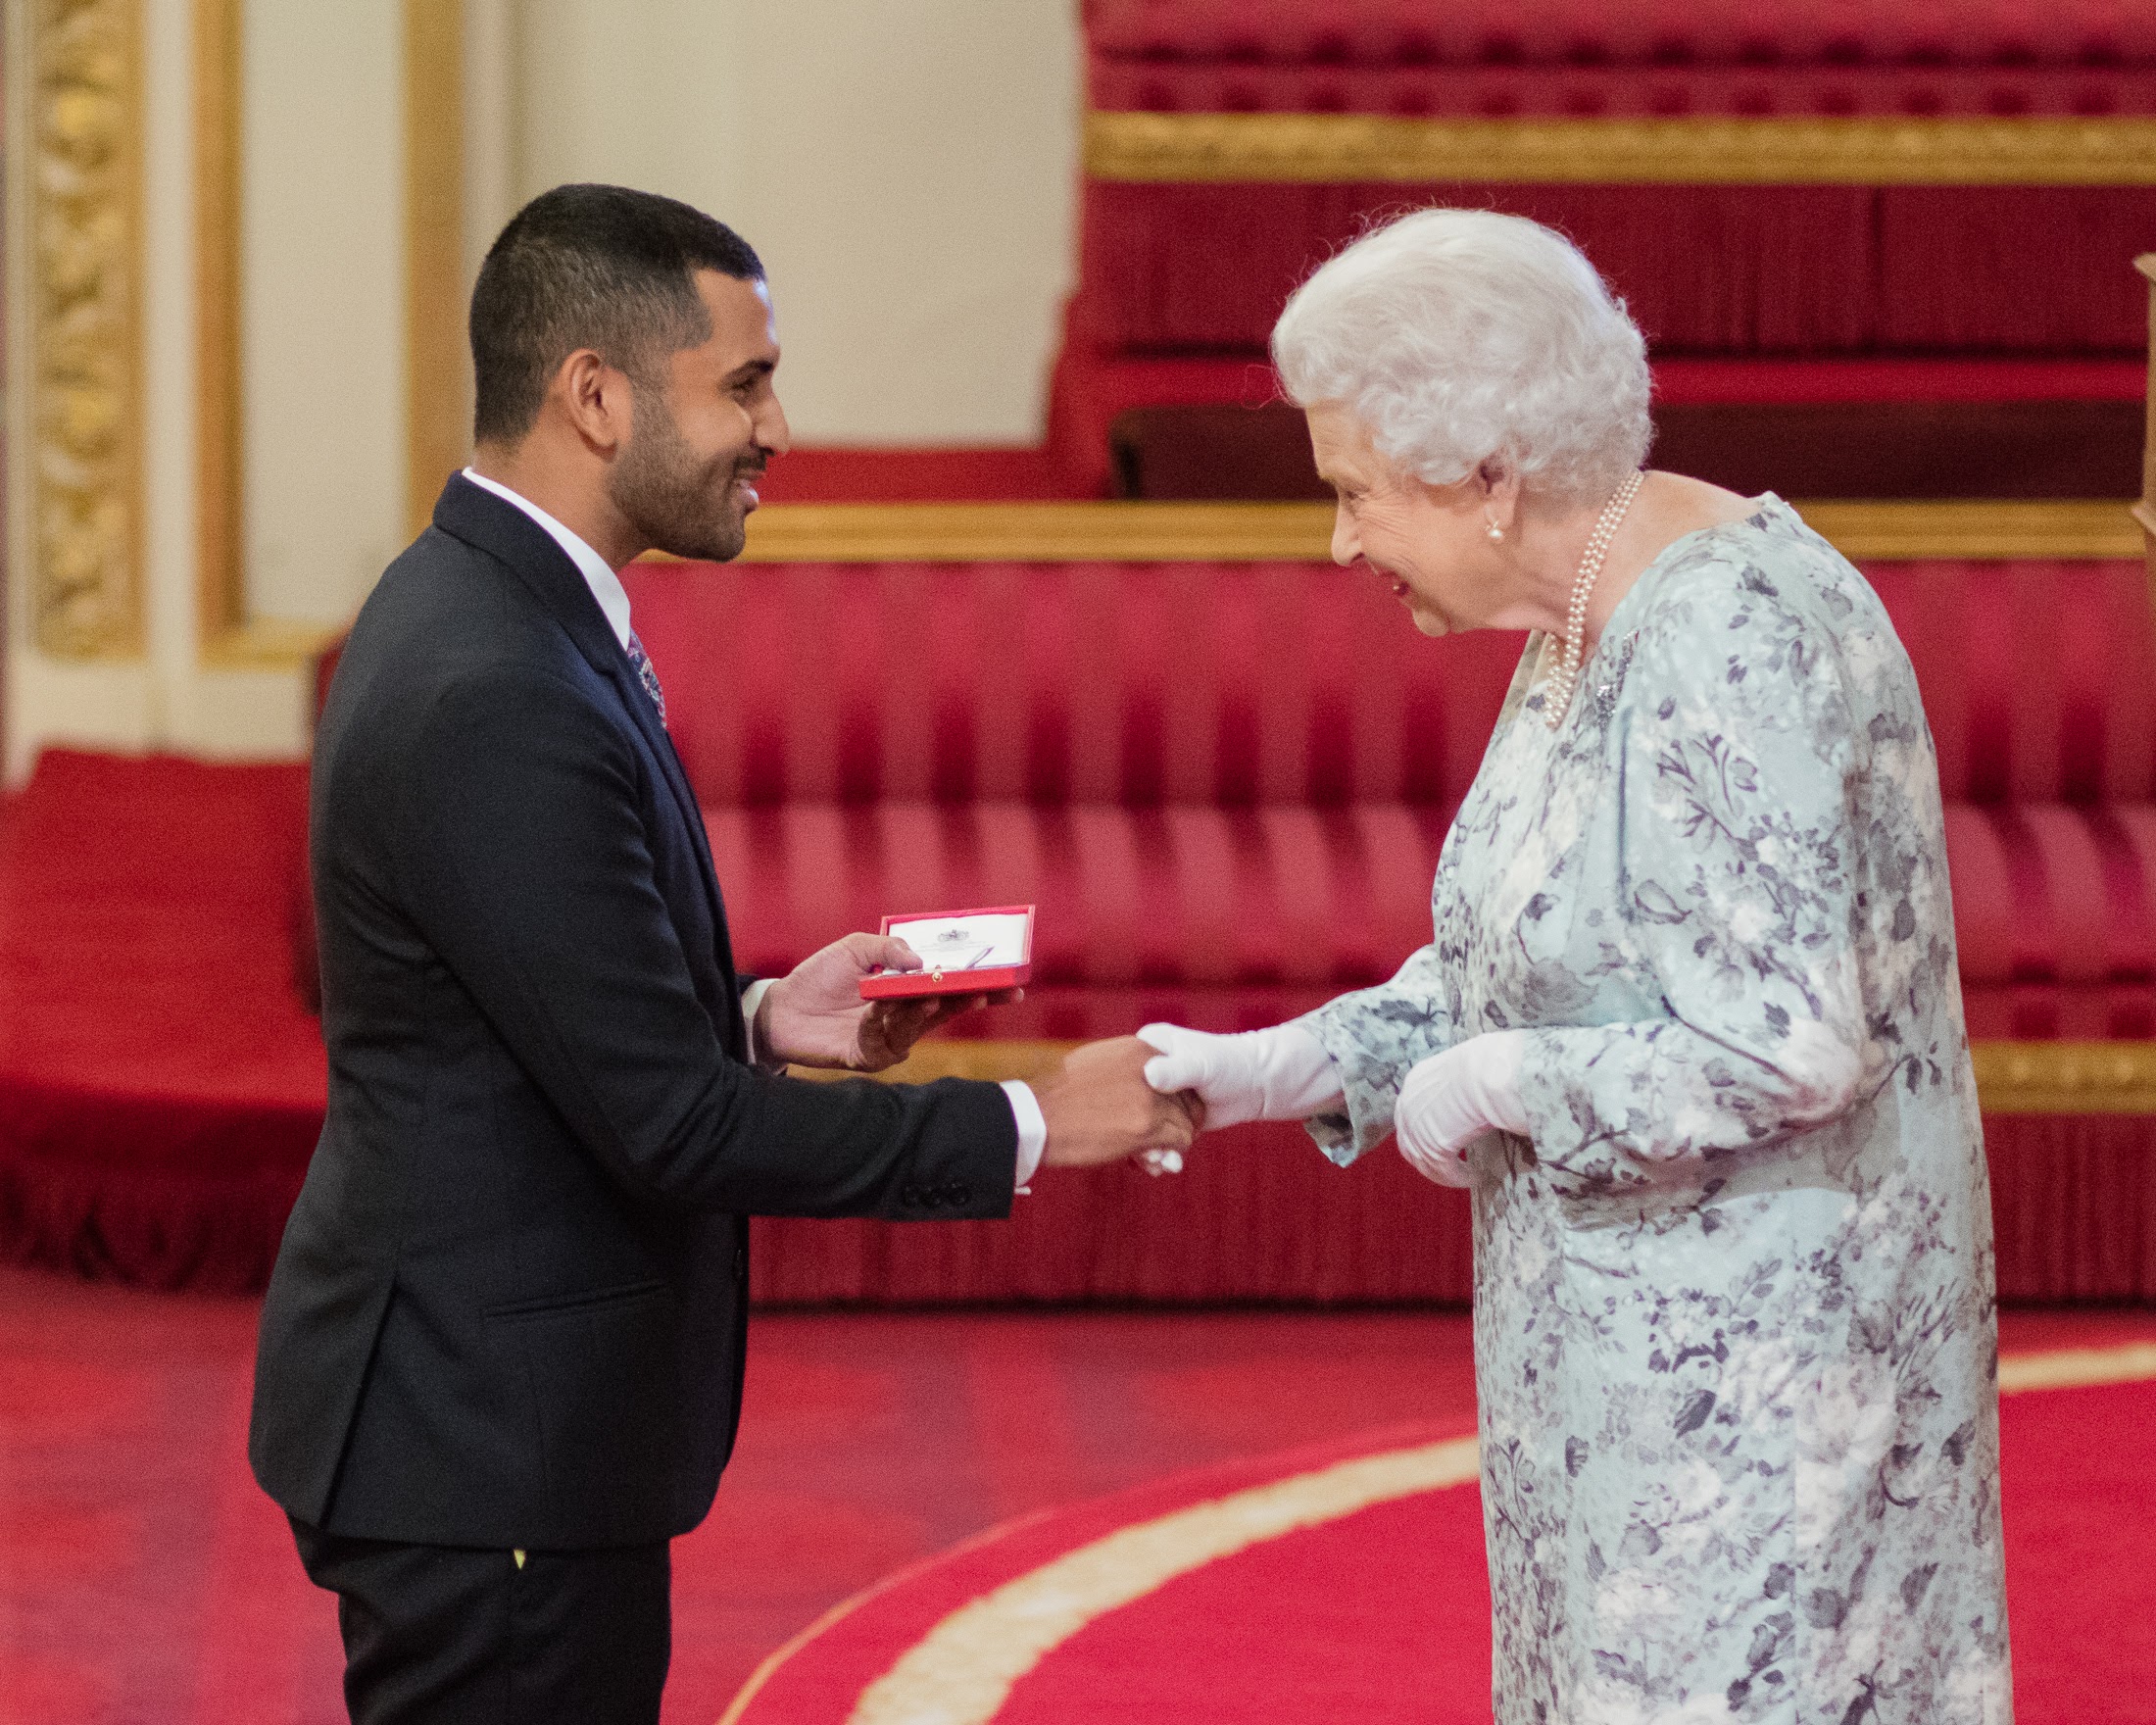 2017 Queens Young Leaders Award Winner Siddel Ramkissoon from Trinidad and Tobago